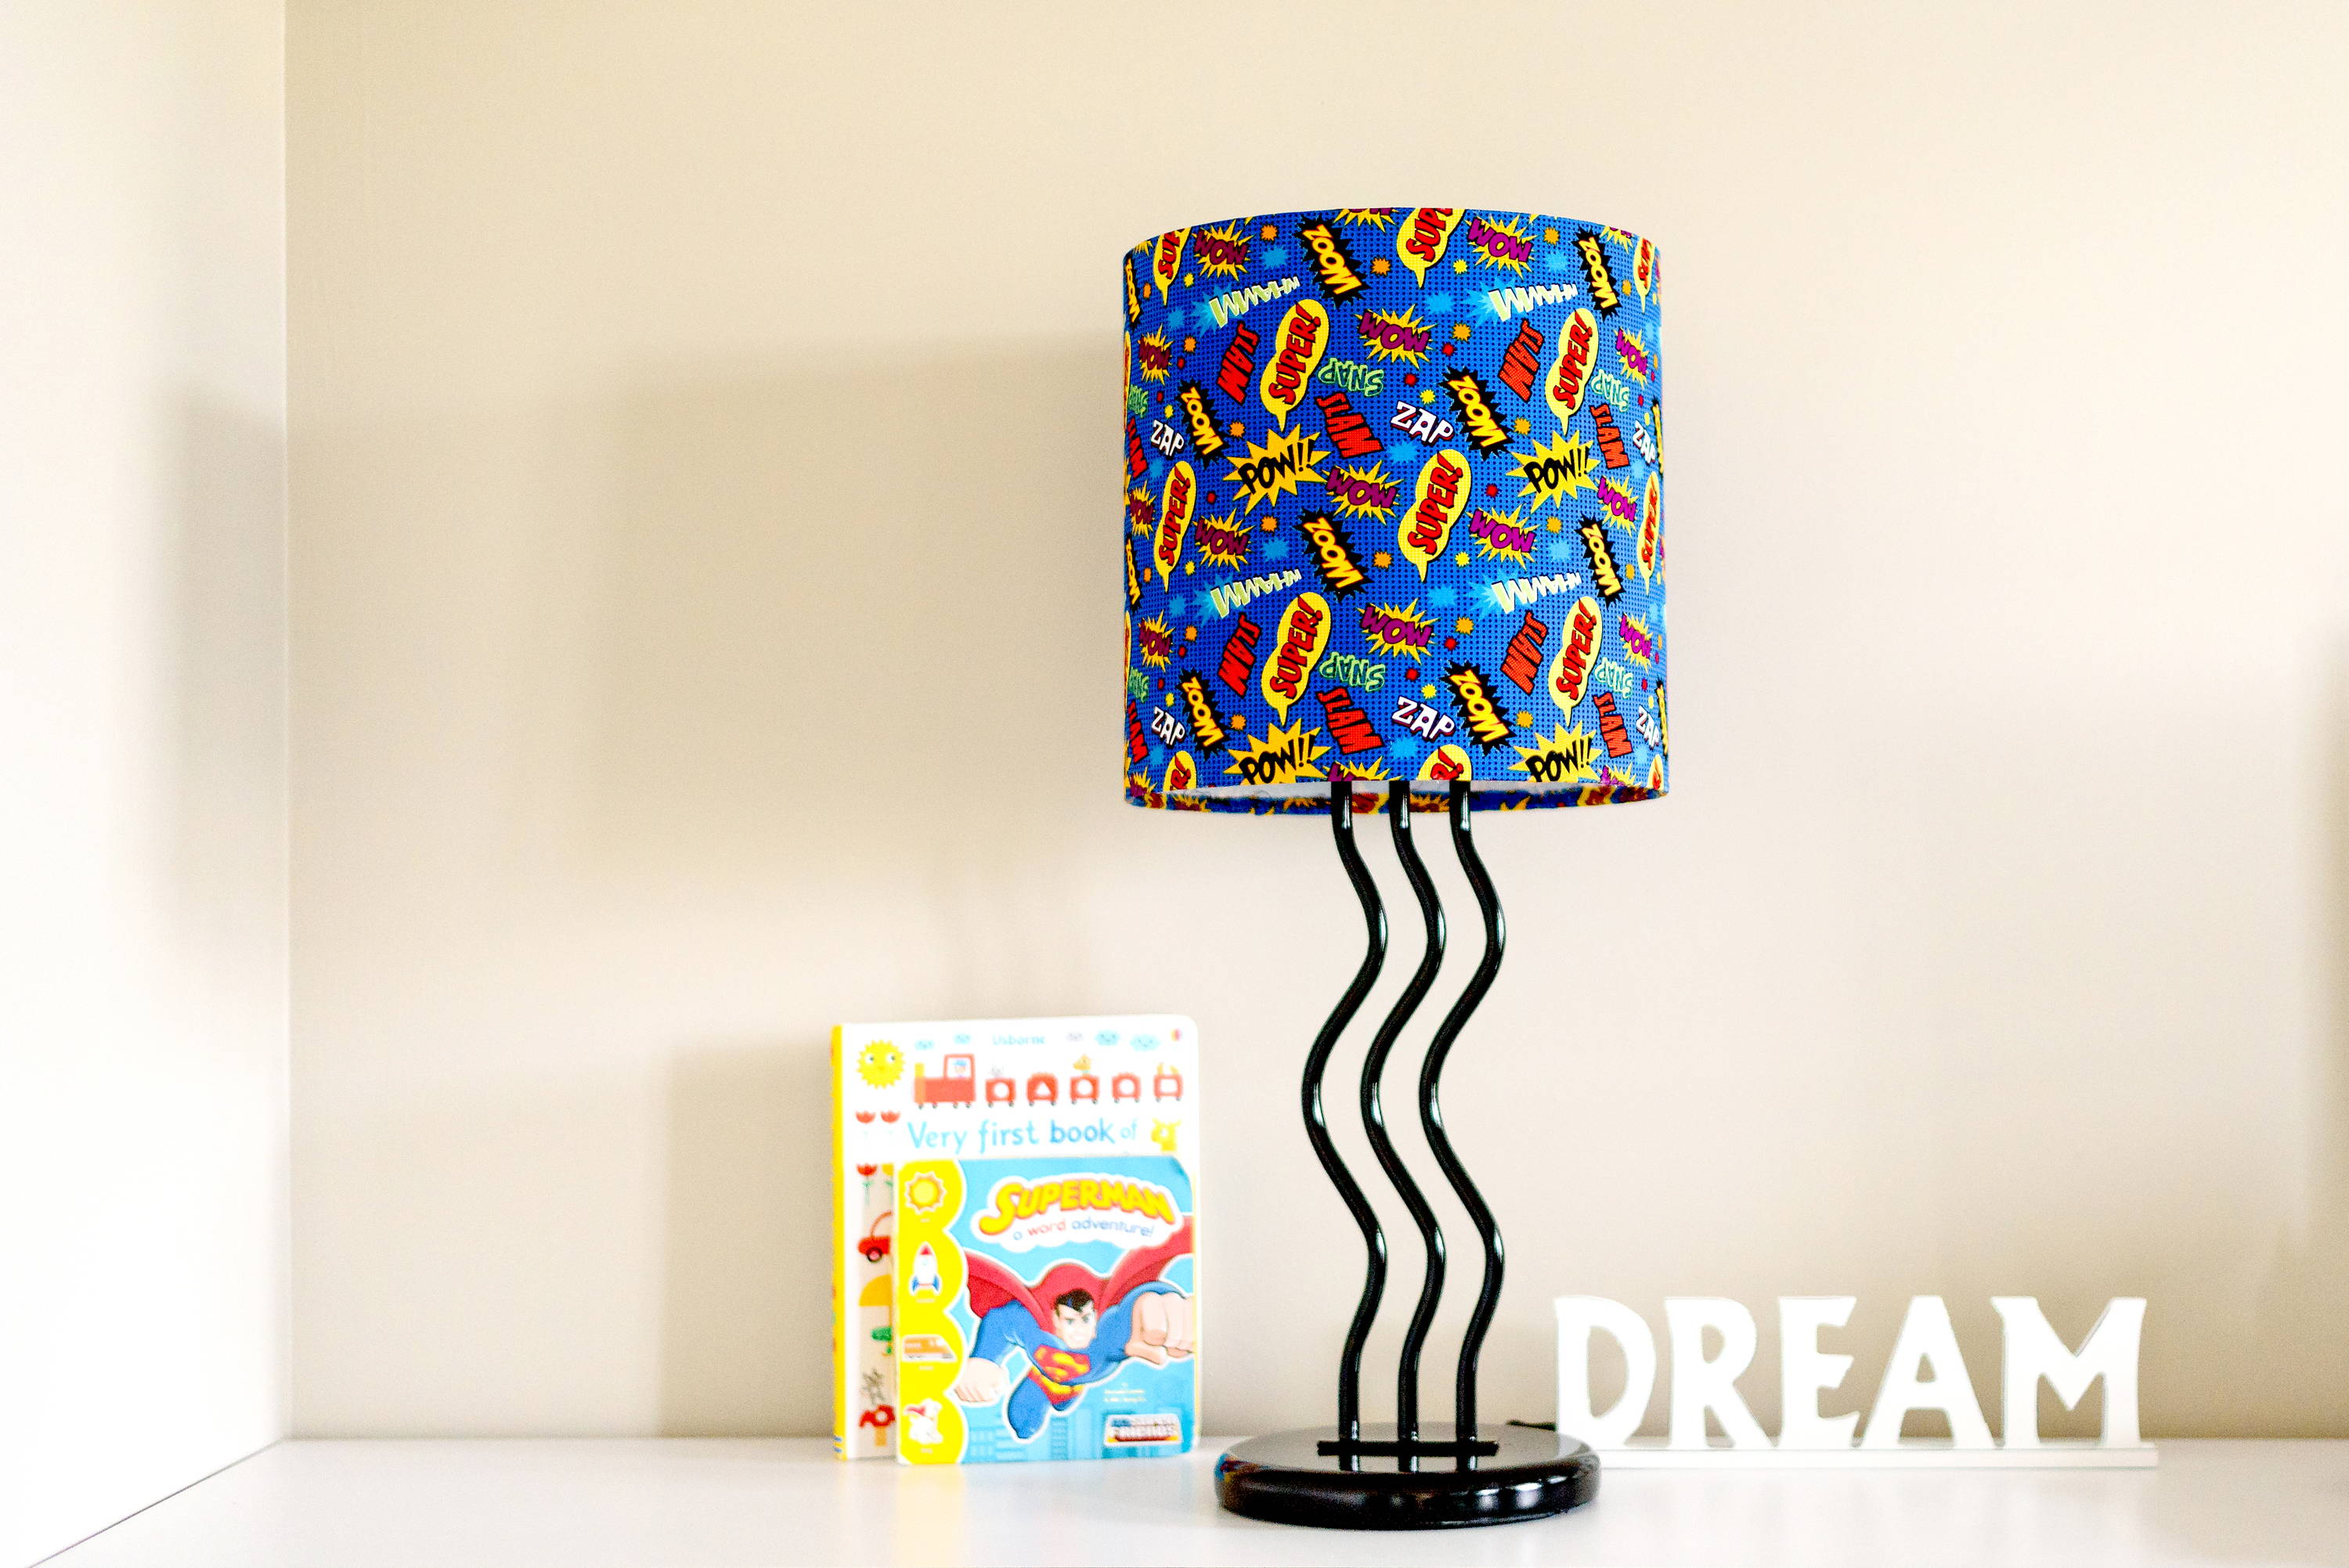 How To Make A Lampshade Using Any, Can You Make A Lampshade Out Of Any Fabric